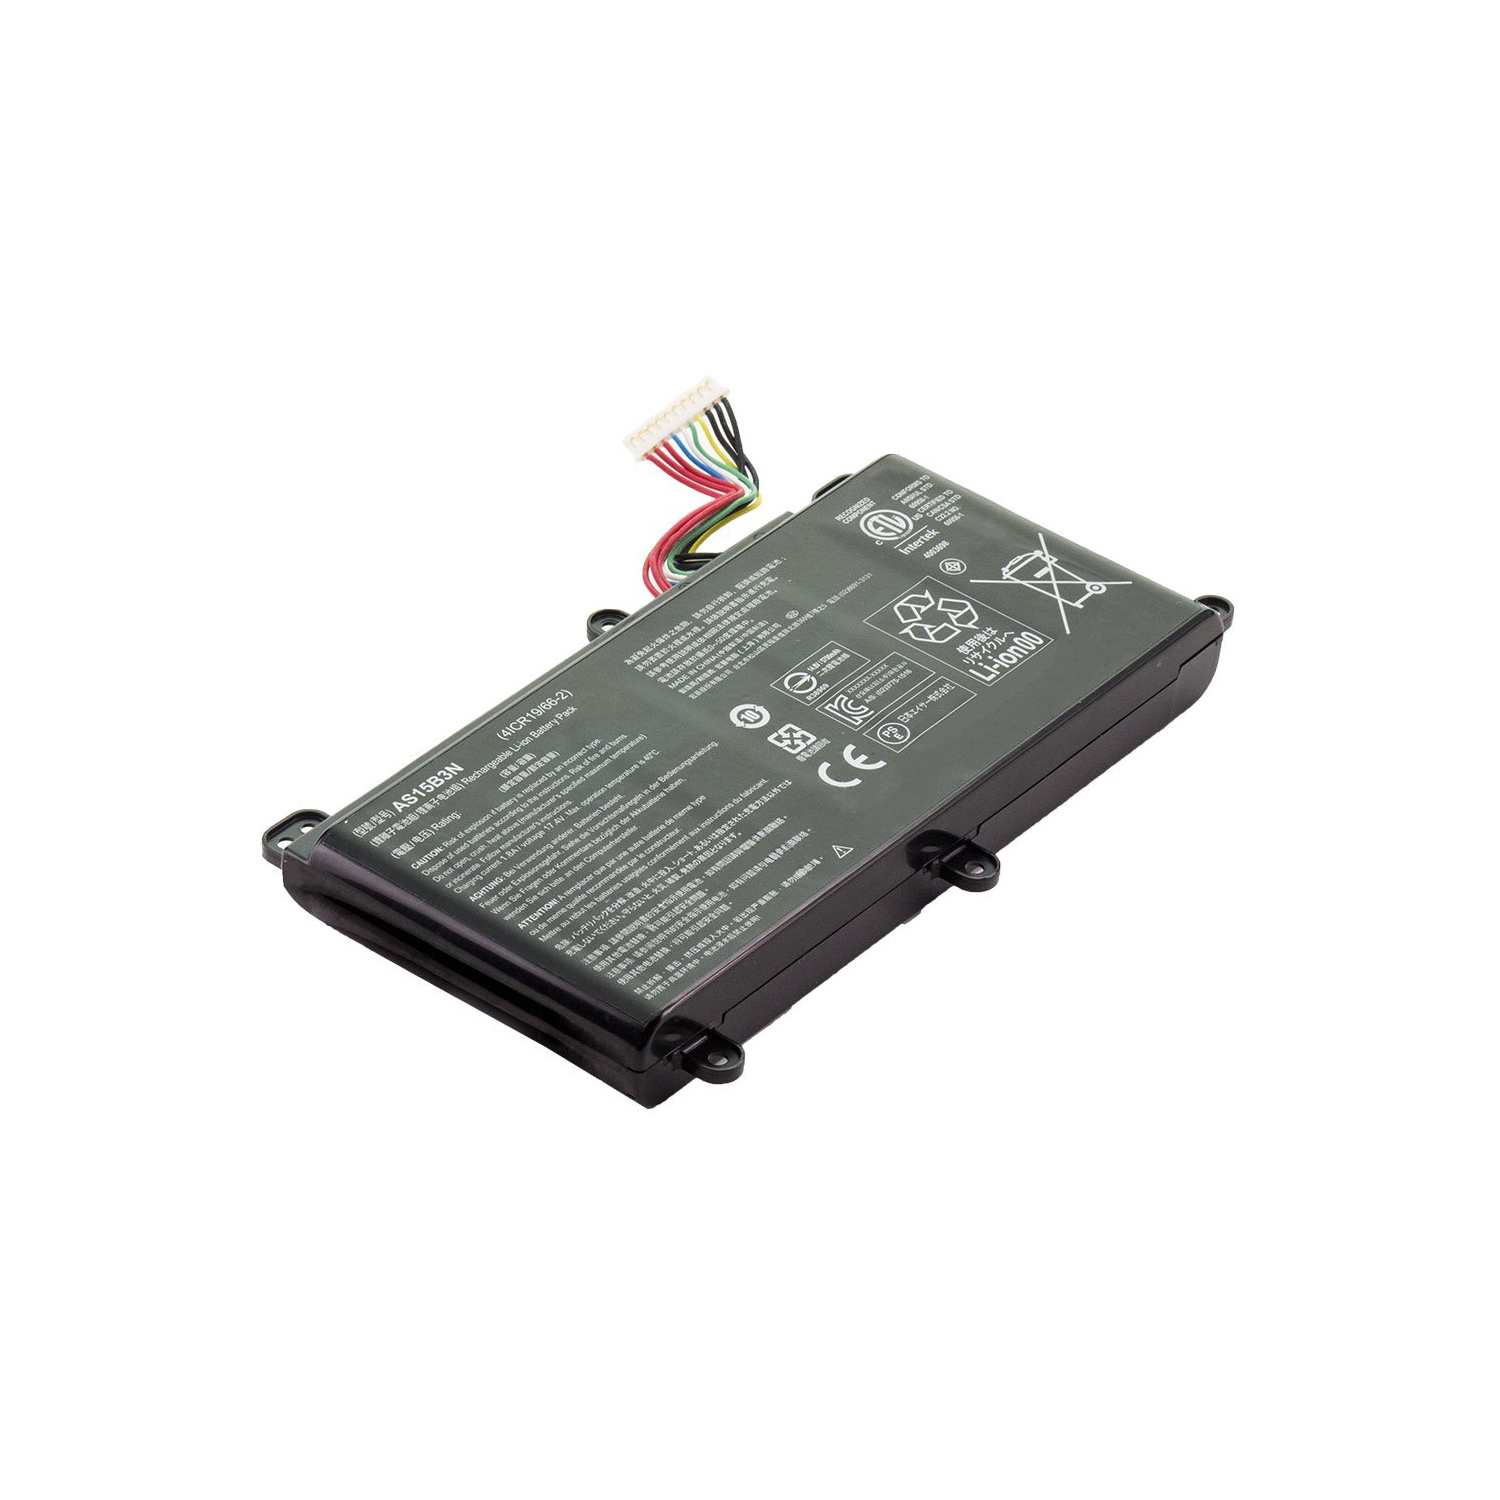 Laptop Battery Replacement for Acer Predator 17 G9-793-74ZV, AS15B3N, KT.00803.004, KT.00803.005